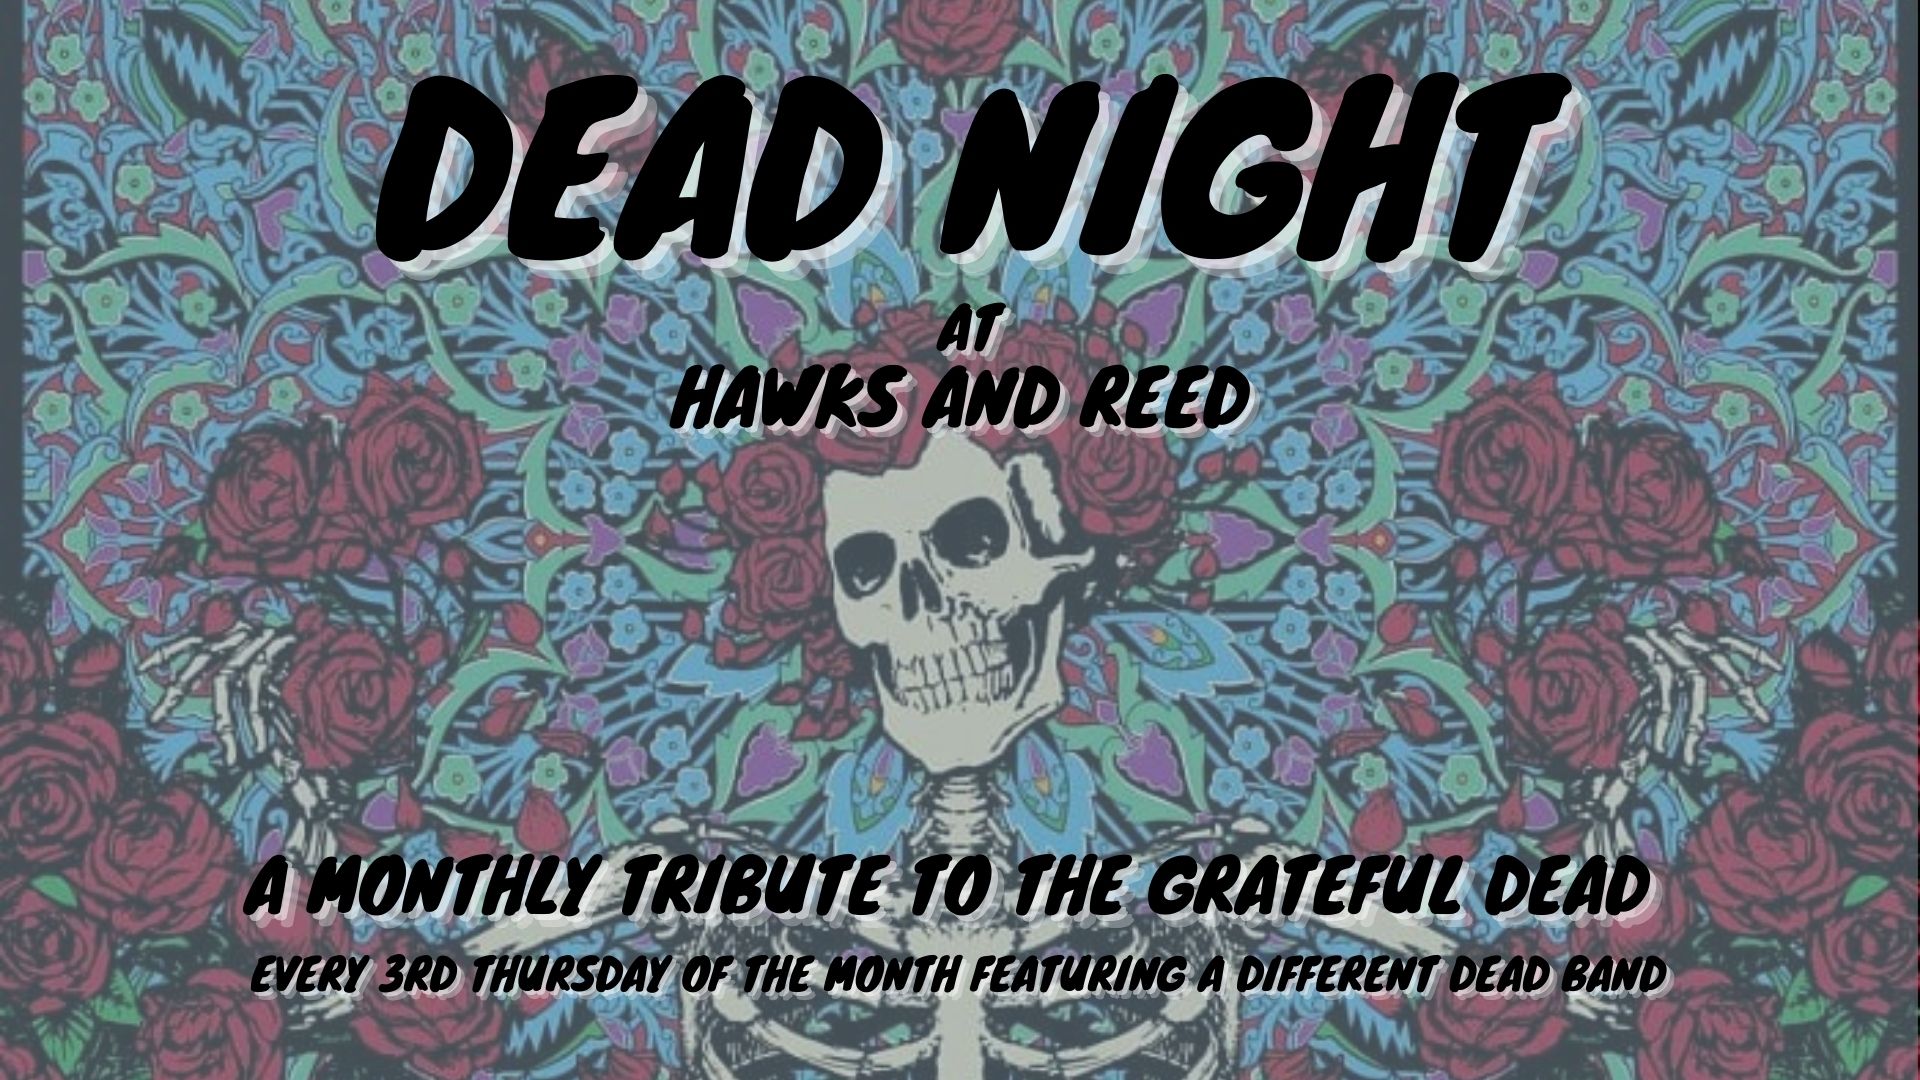 DEAD NIGHT AT HAWKS AND REED – Performer TBA